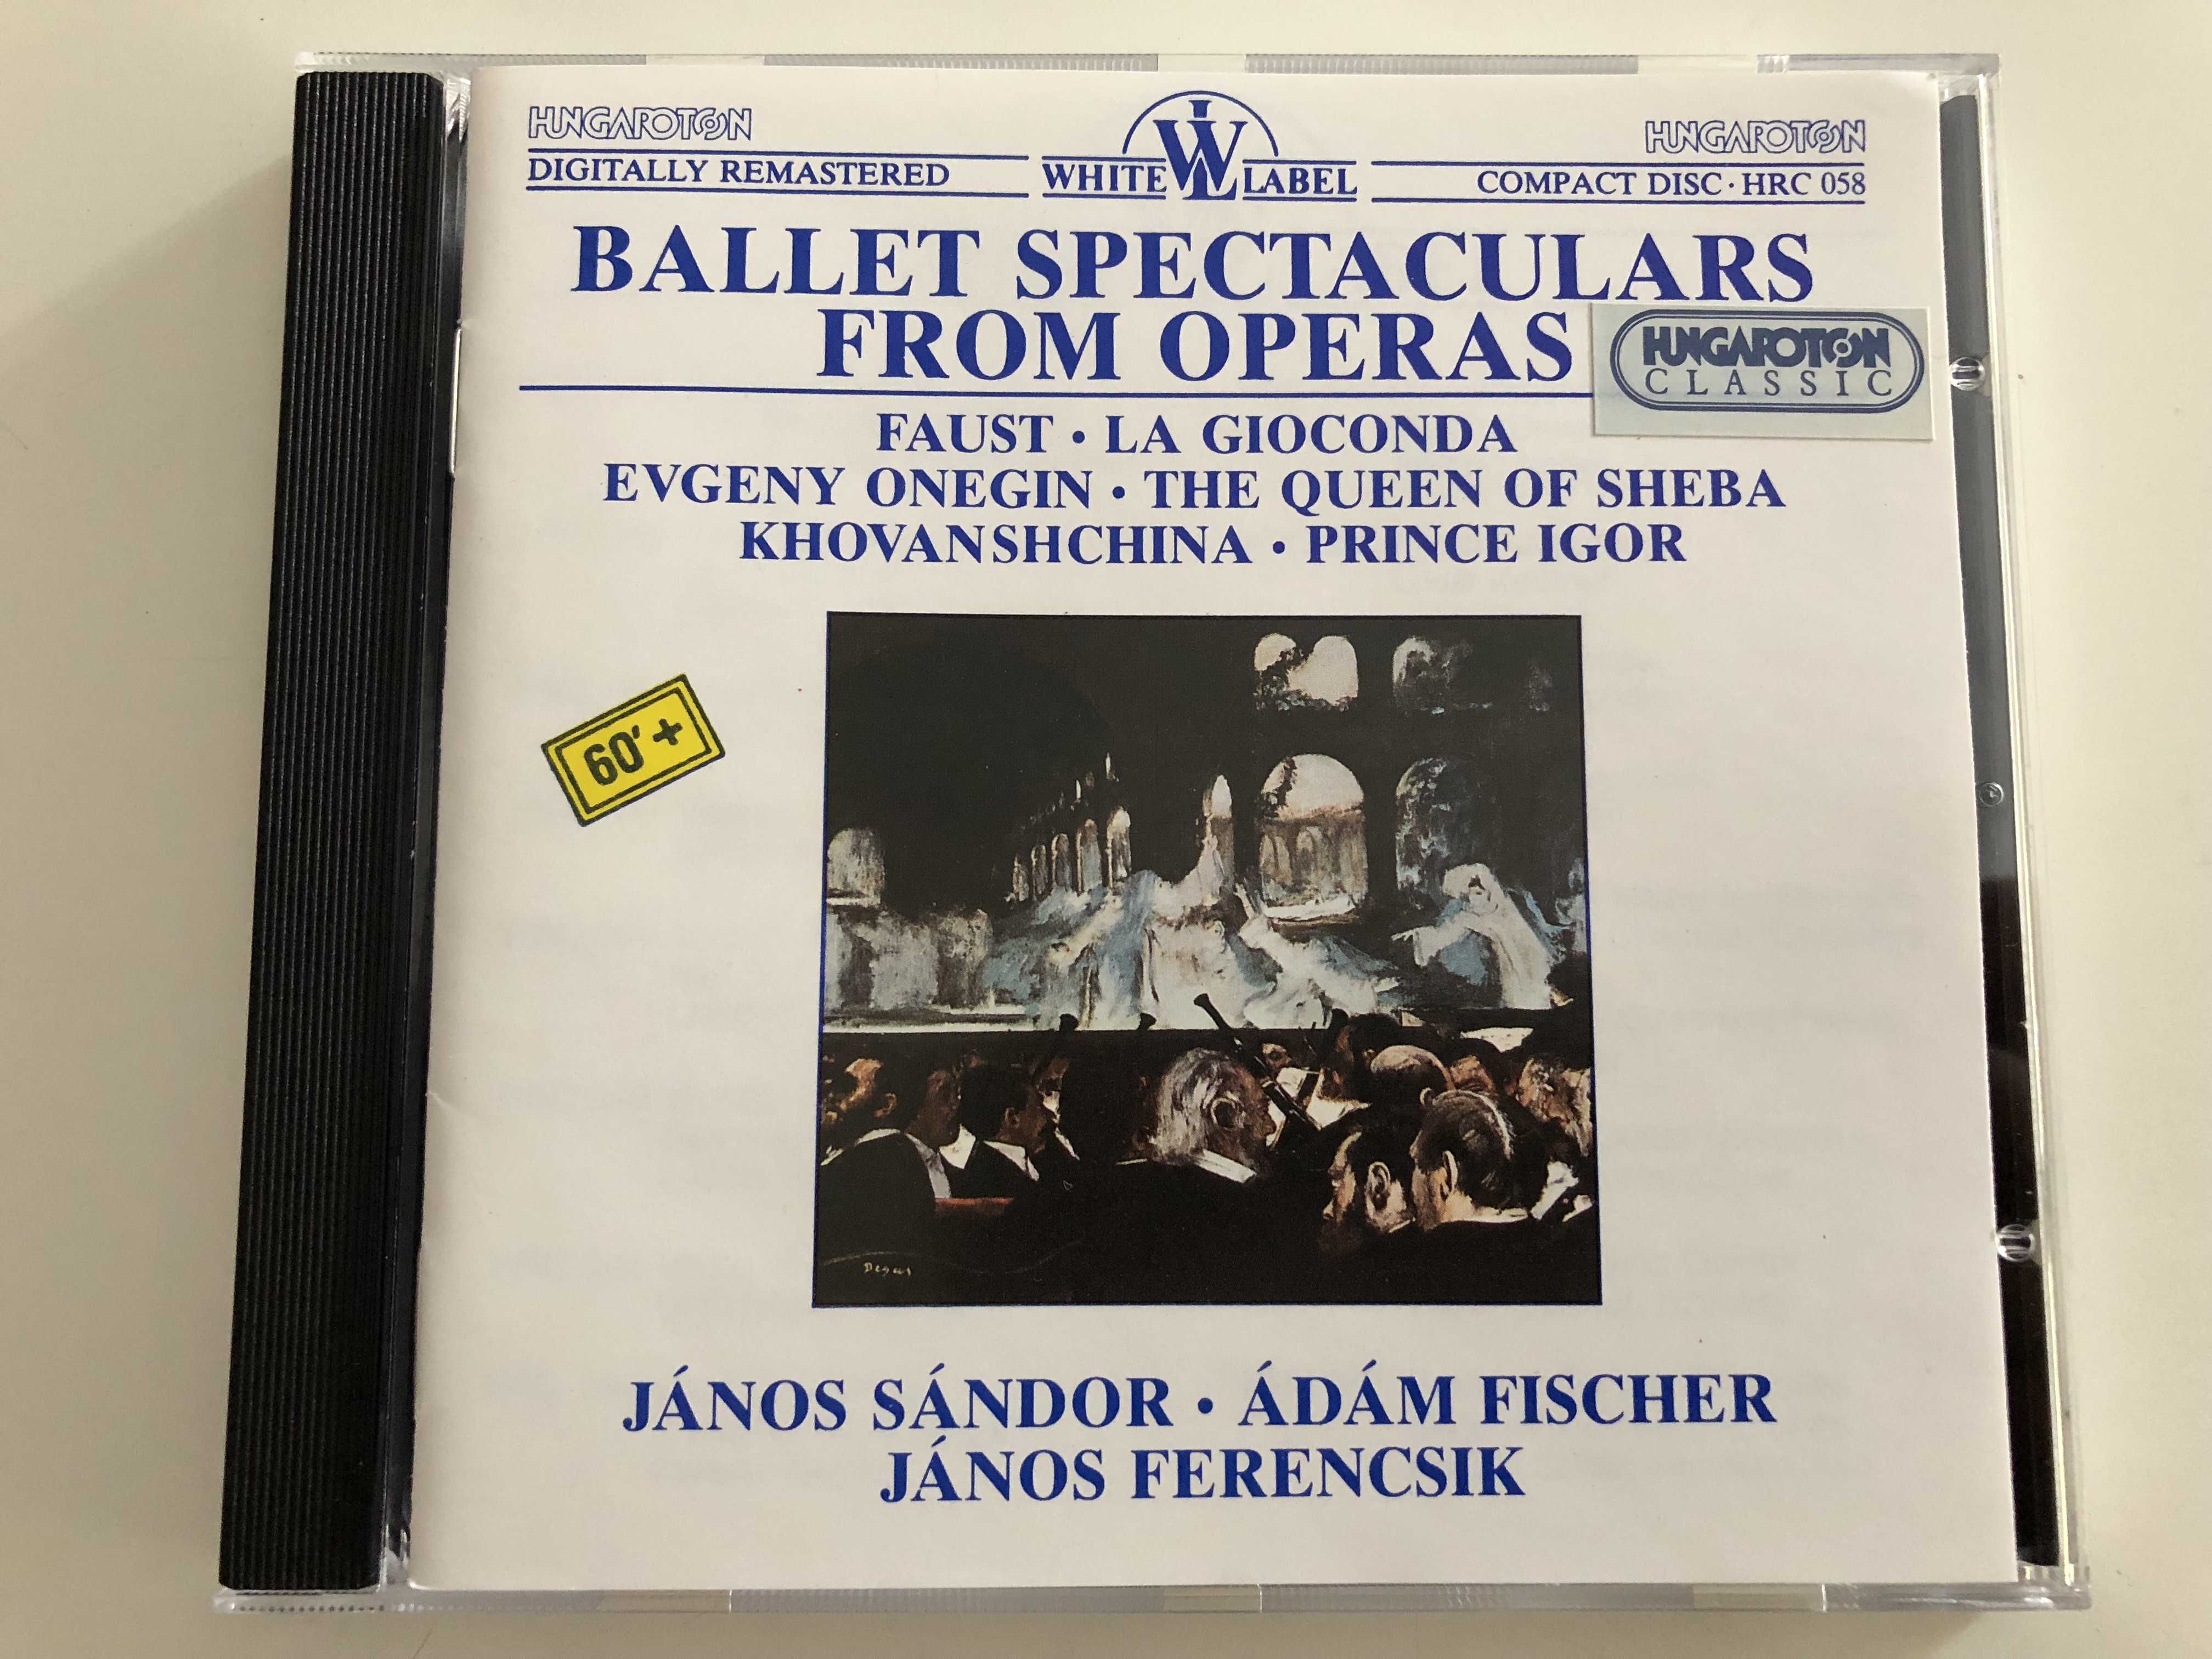 ballet-spectaculers-from-operas-faust-la-gioconda-evgeny-onegin-the-queen-of-sheba-prince-igor-j-nos-s-ndor-d-m-fischer-j-nos-ferencsik-hungaroton-white-label-audio-cd-1987-hrc-058-1-.jpg